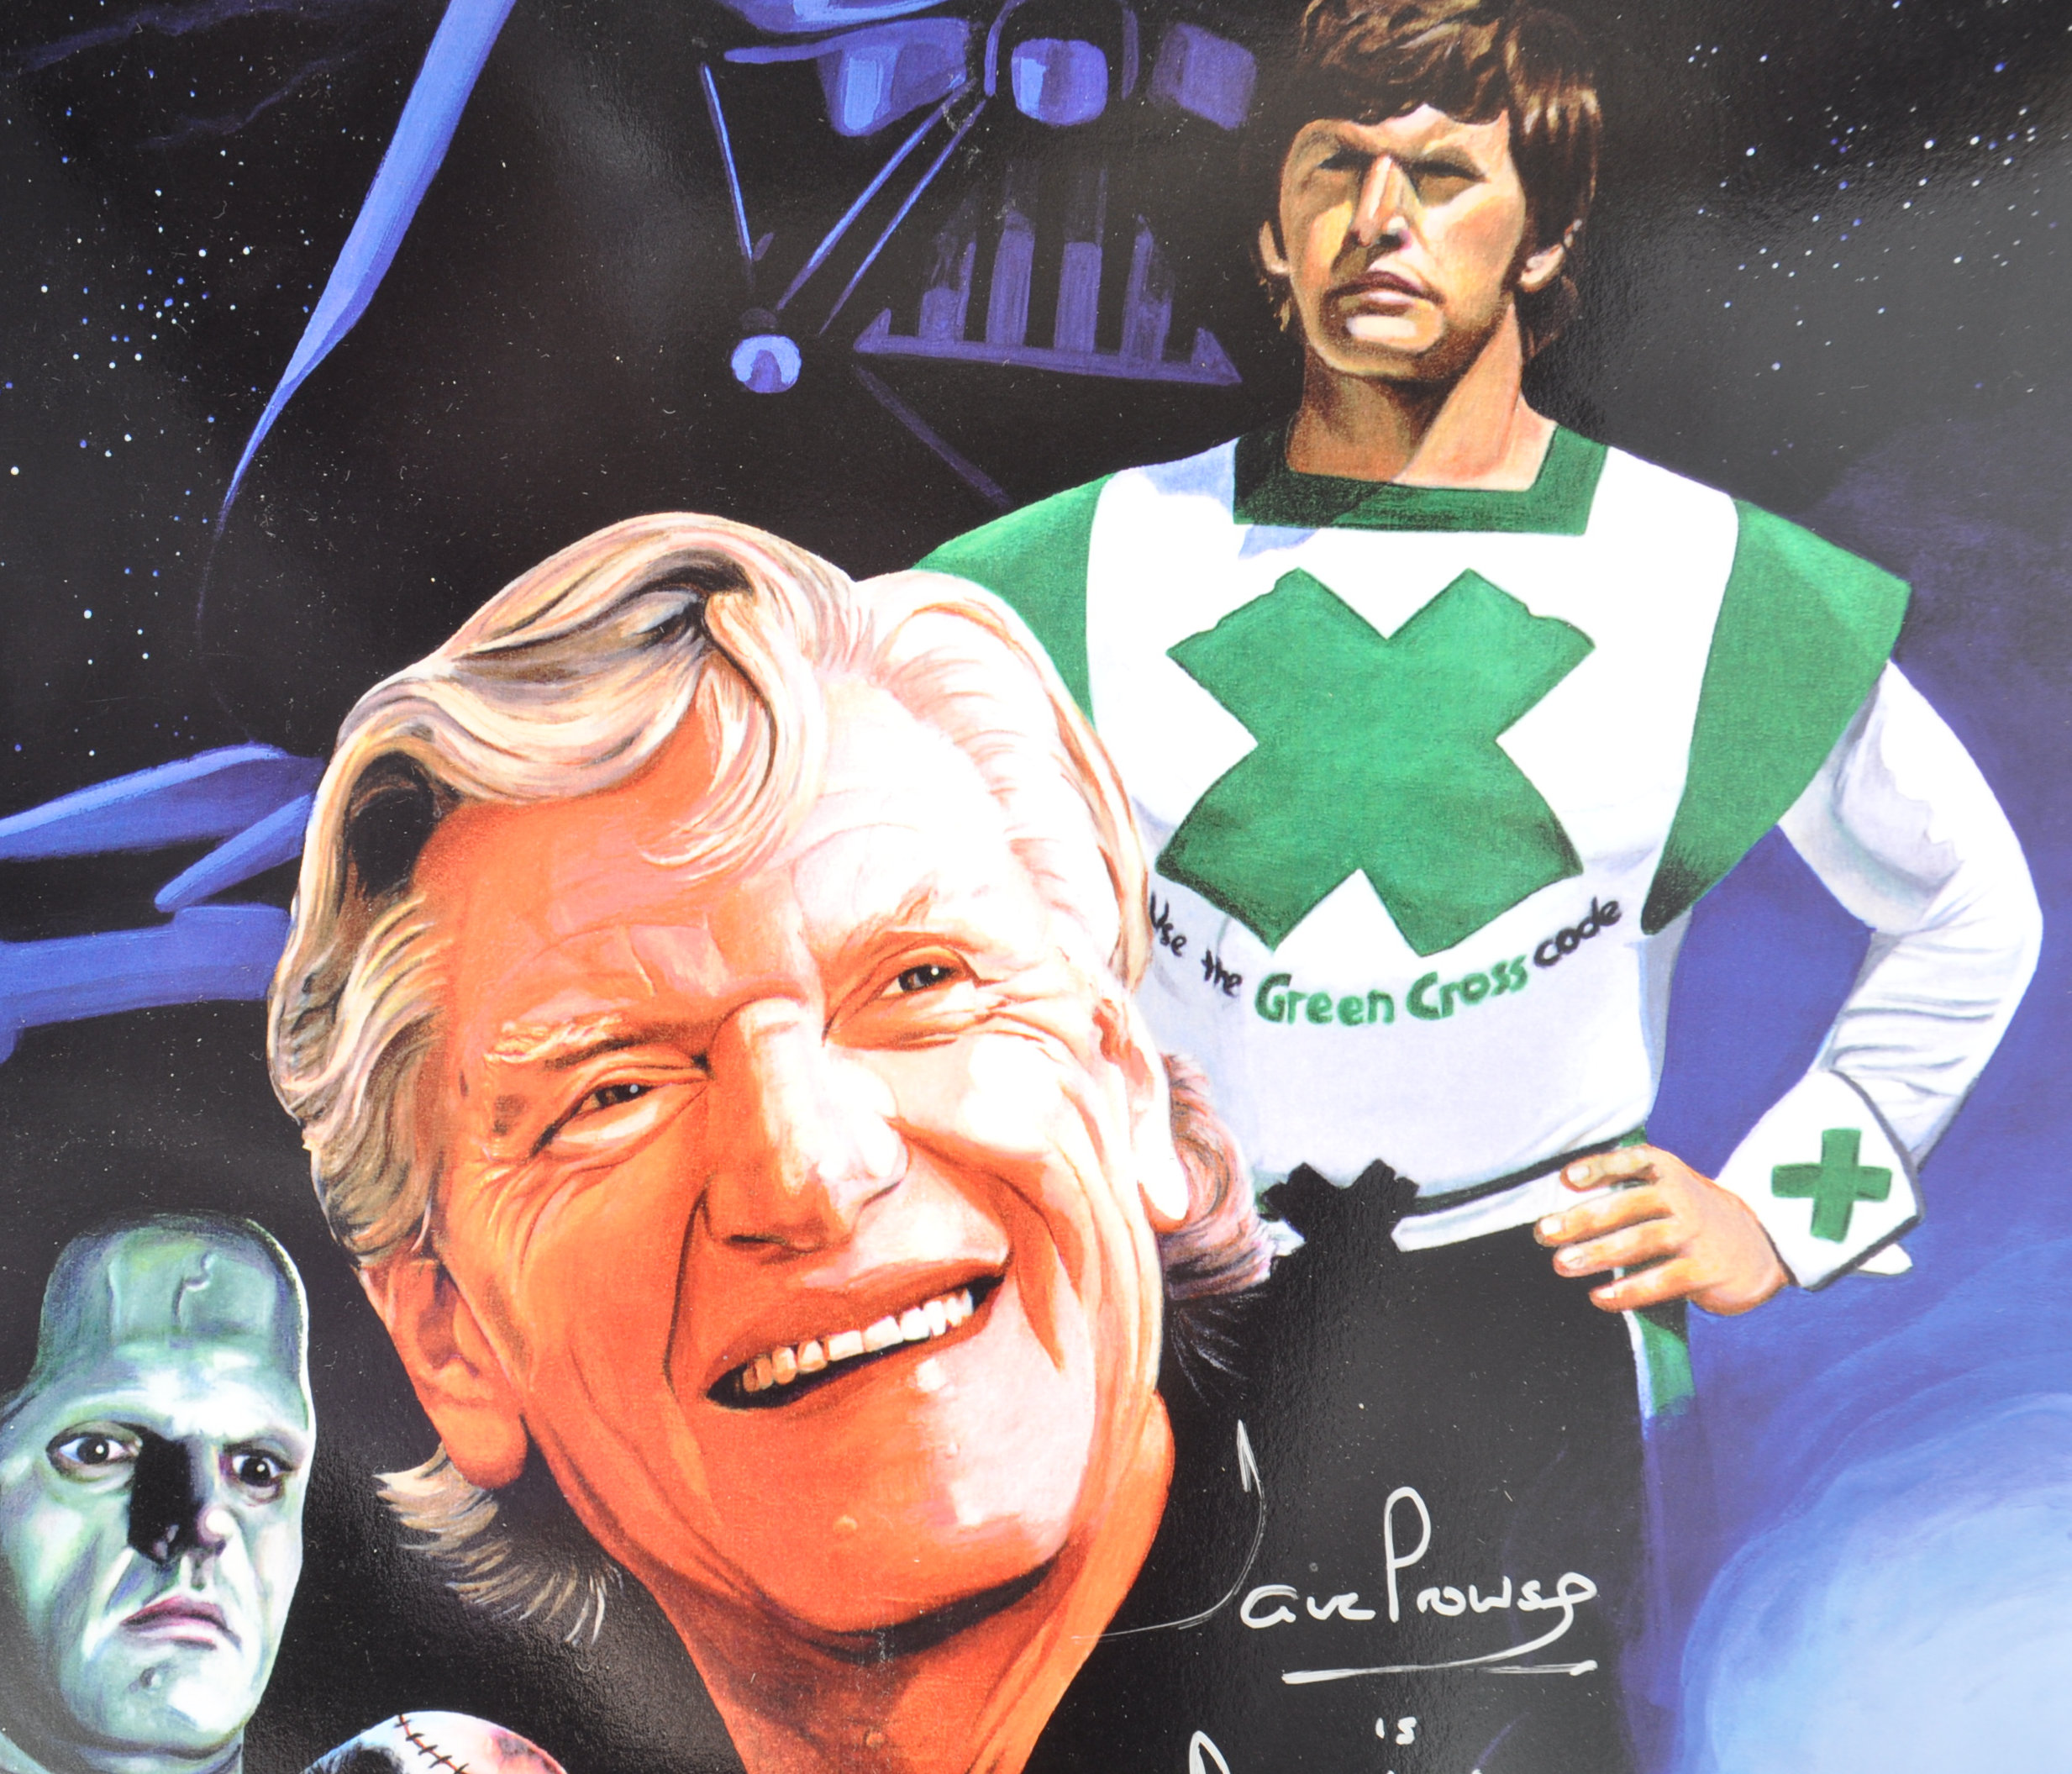 ESTATE OF DAVE PROWSE - SIGNED MONTAGE ARTWORK PRINT - Image 2 of 3